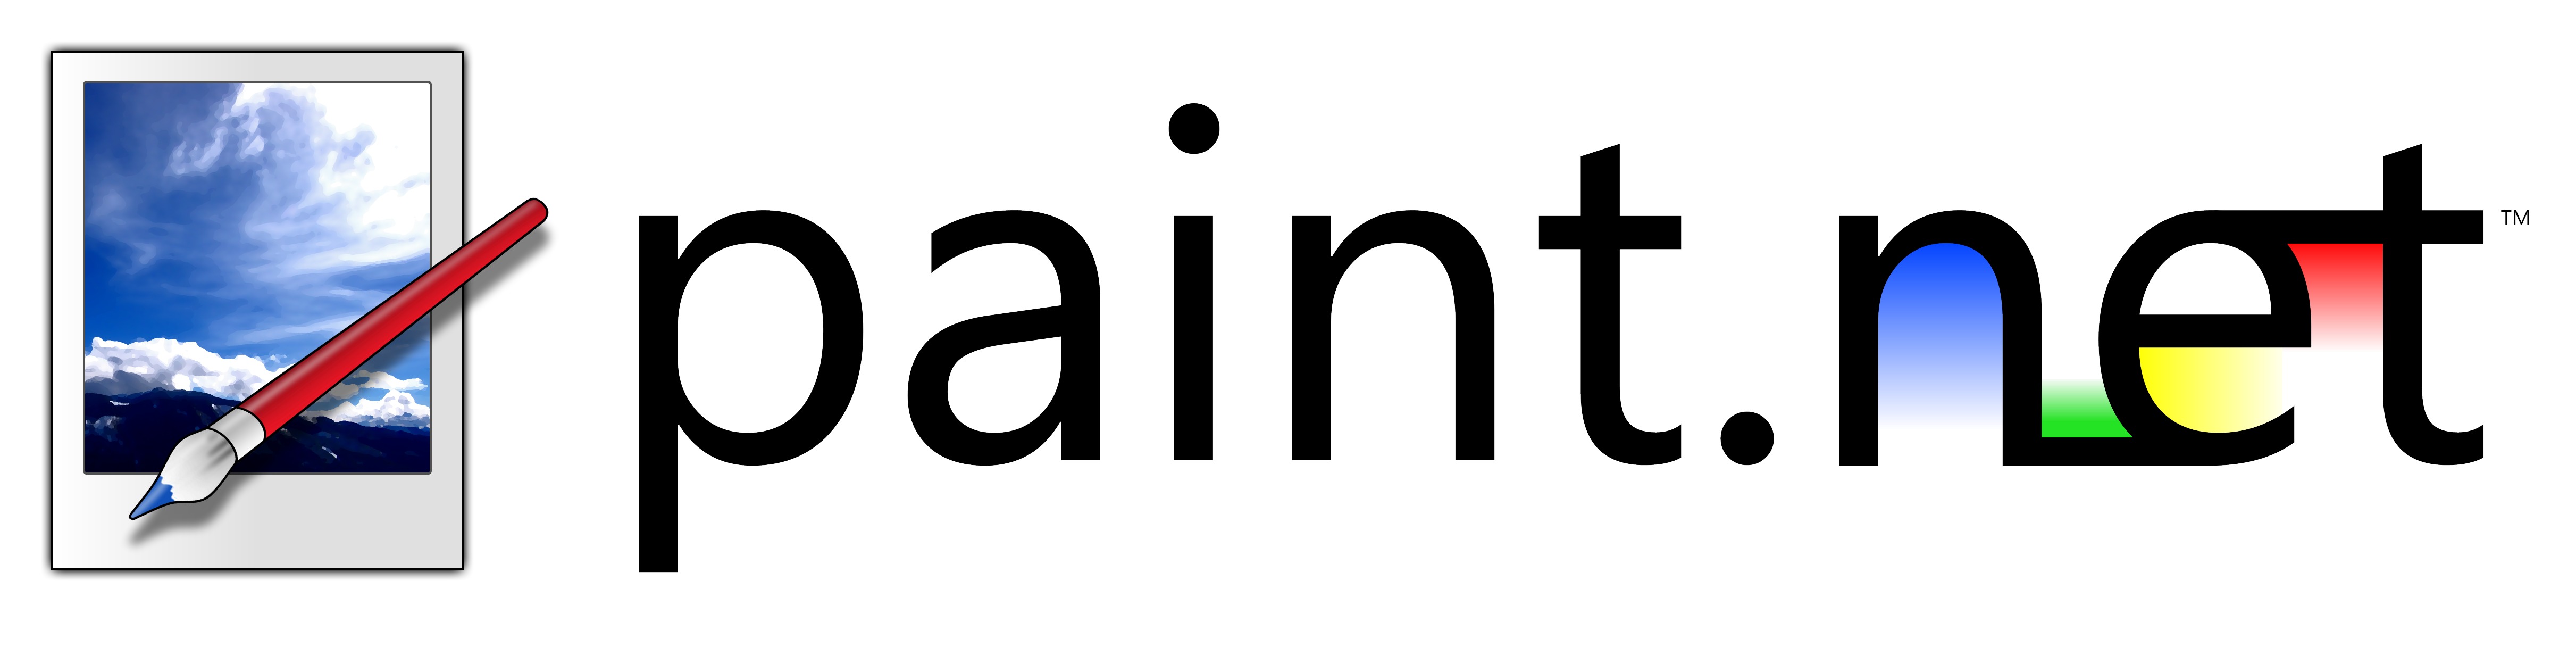 Paint.NET 5.0.11 for windows download free